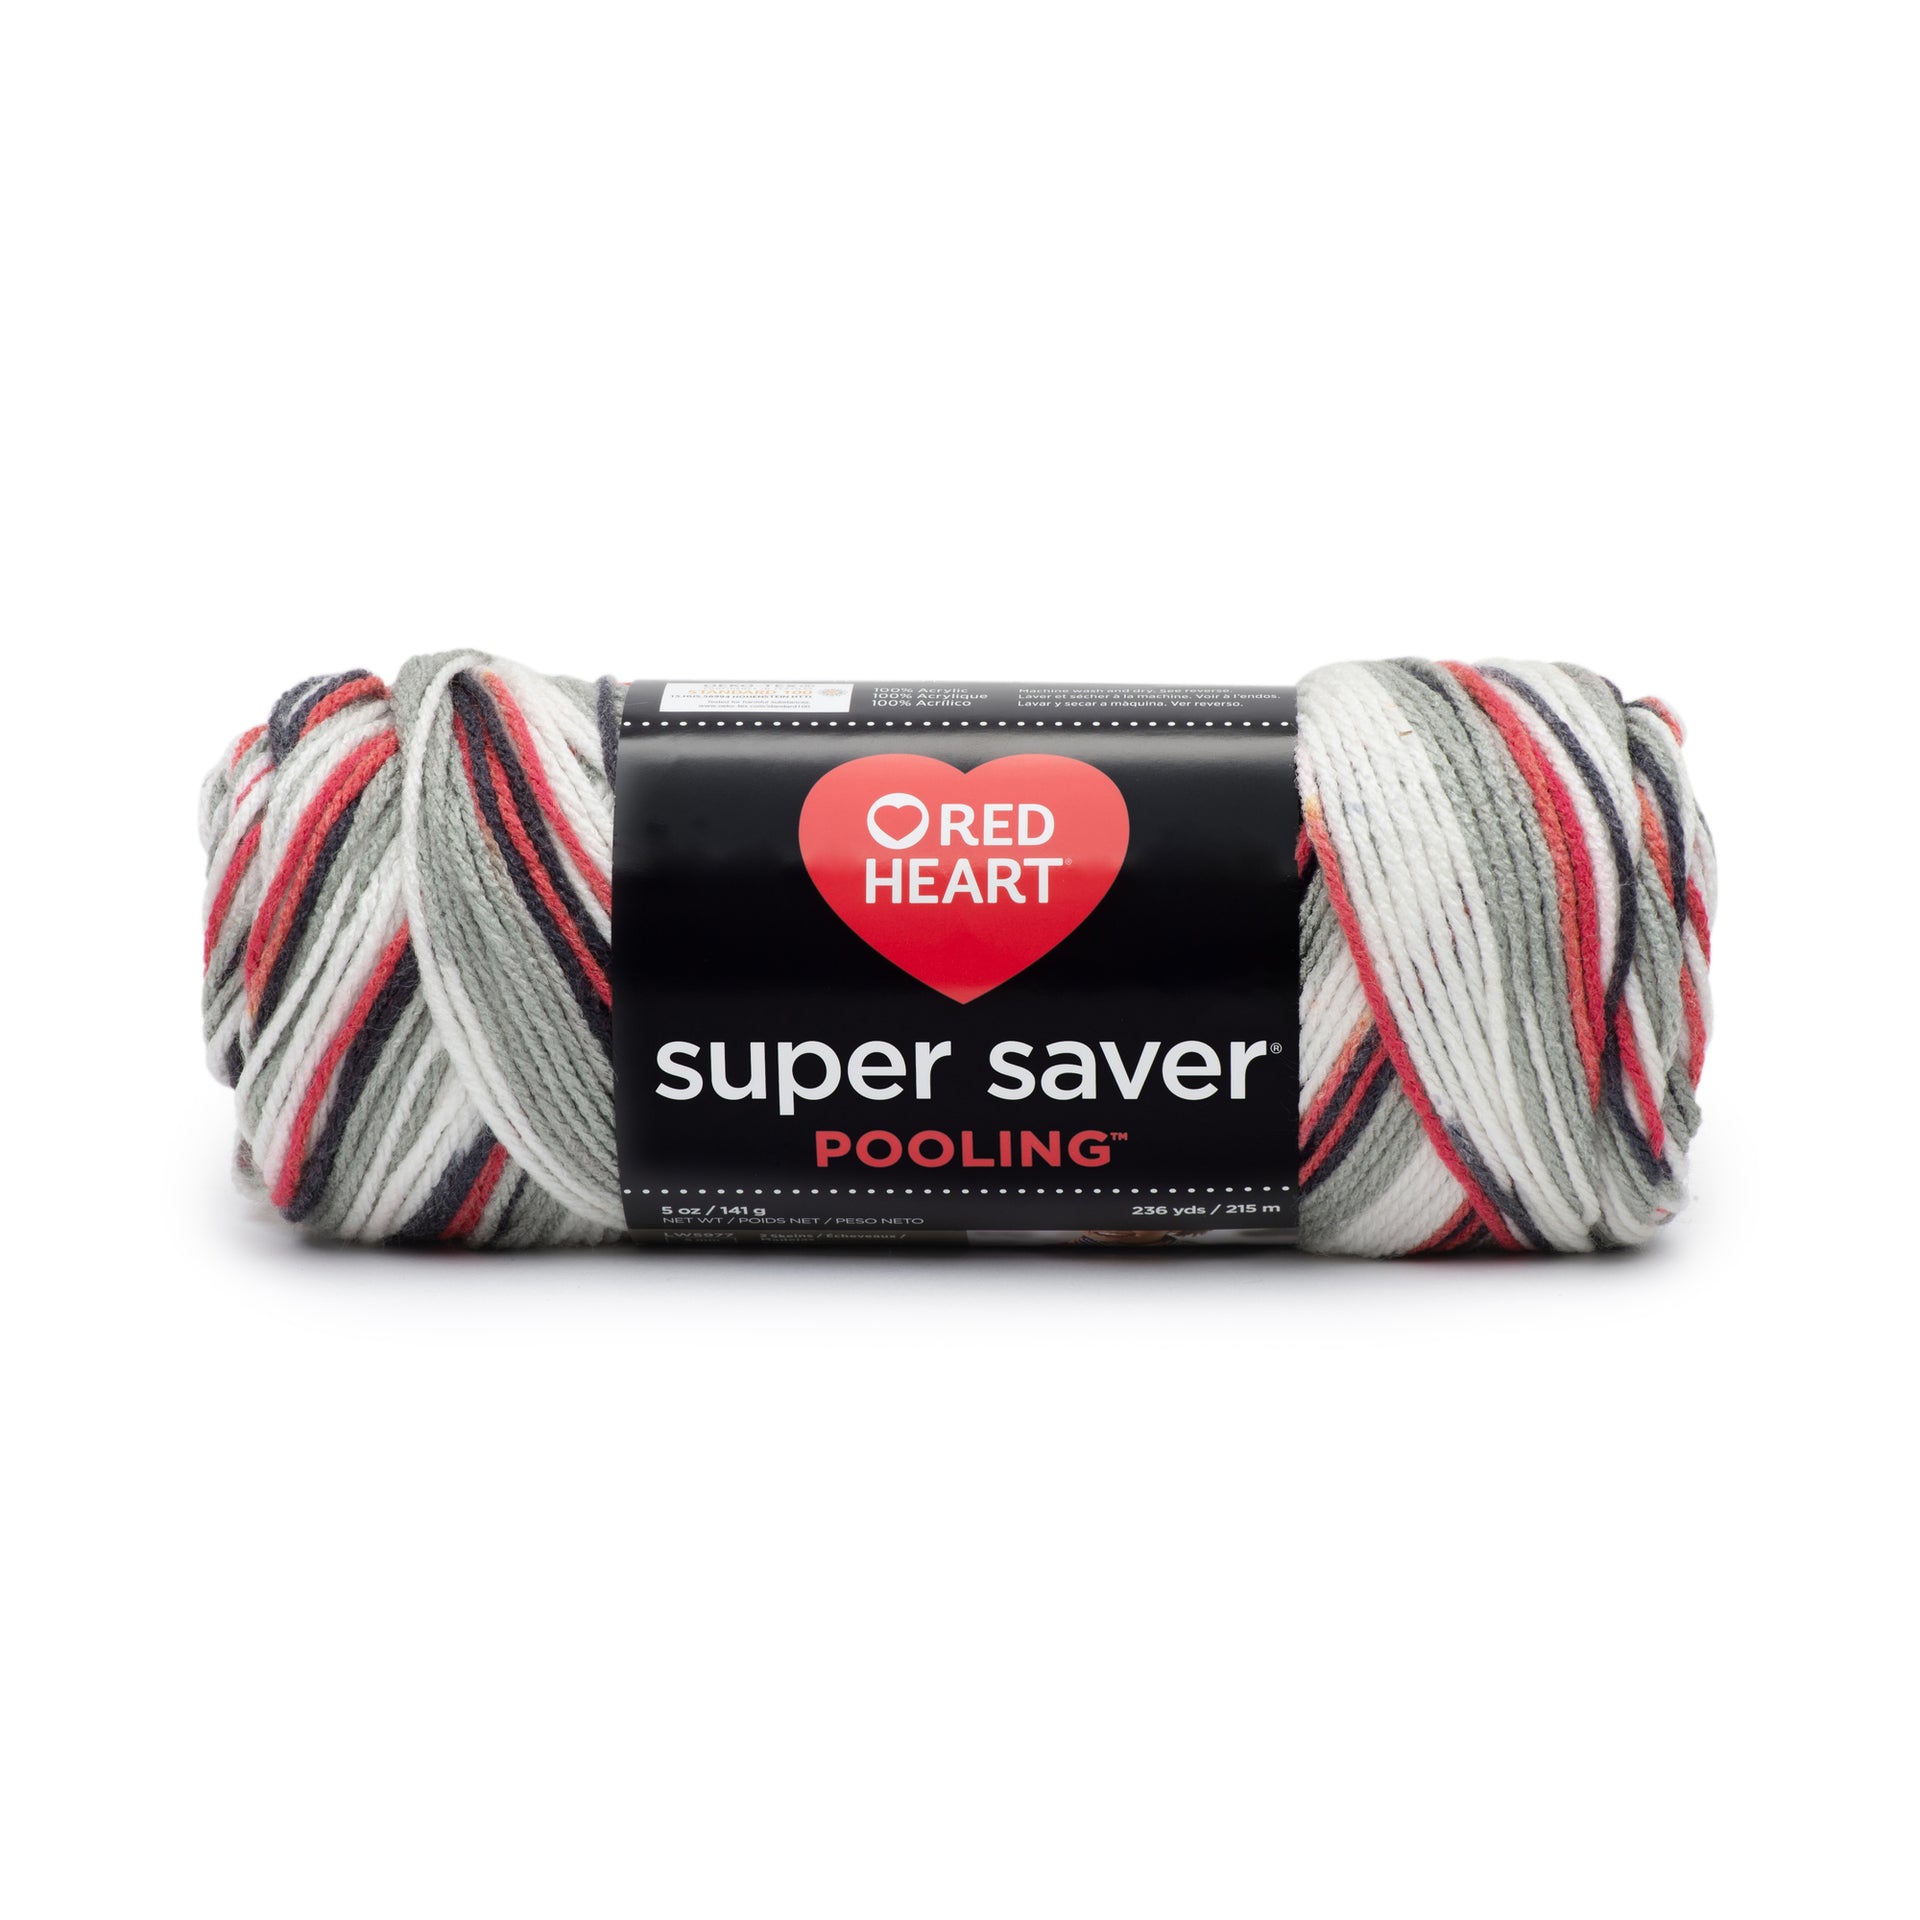 Red Heart Super Saver Yarn, 3 Pack, Artist Print 3 Count